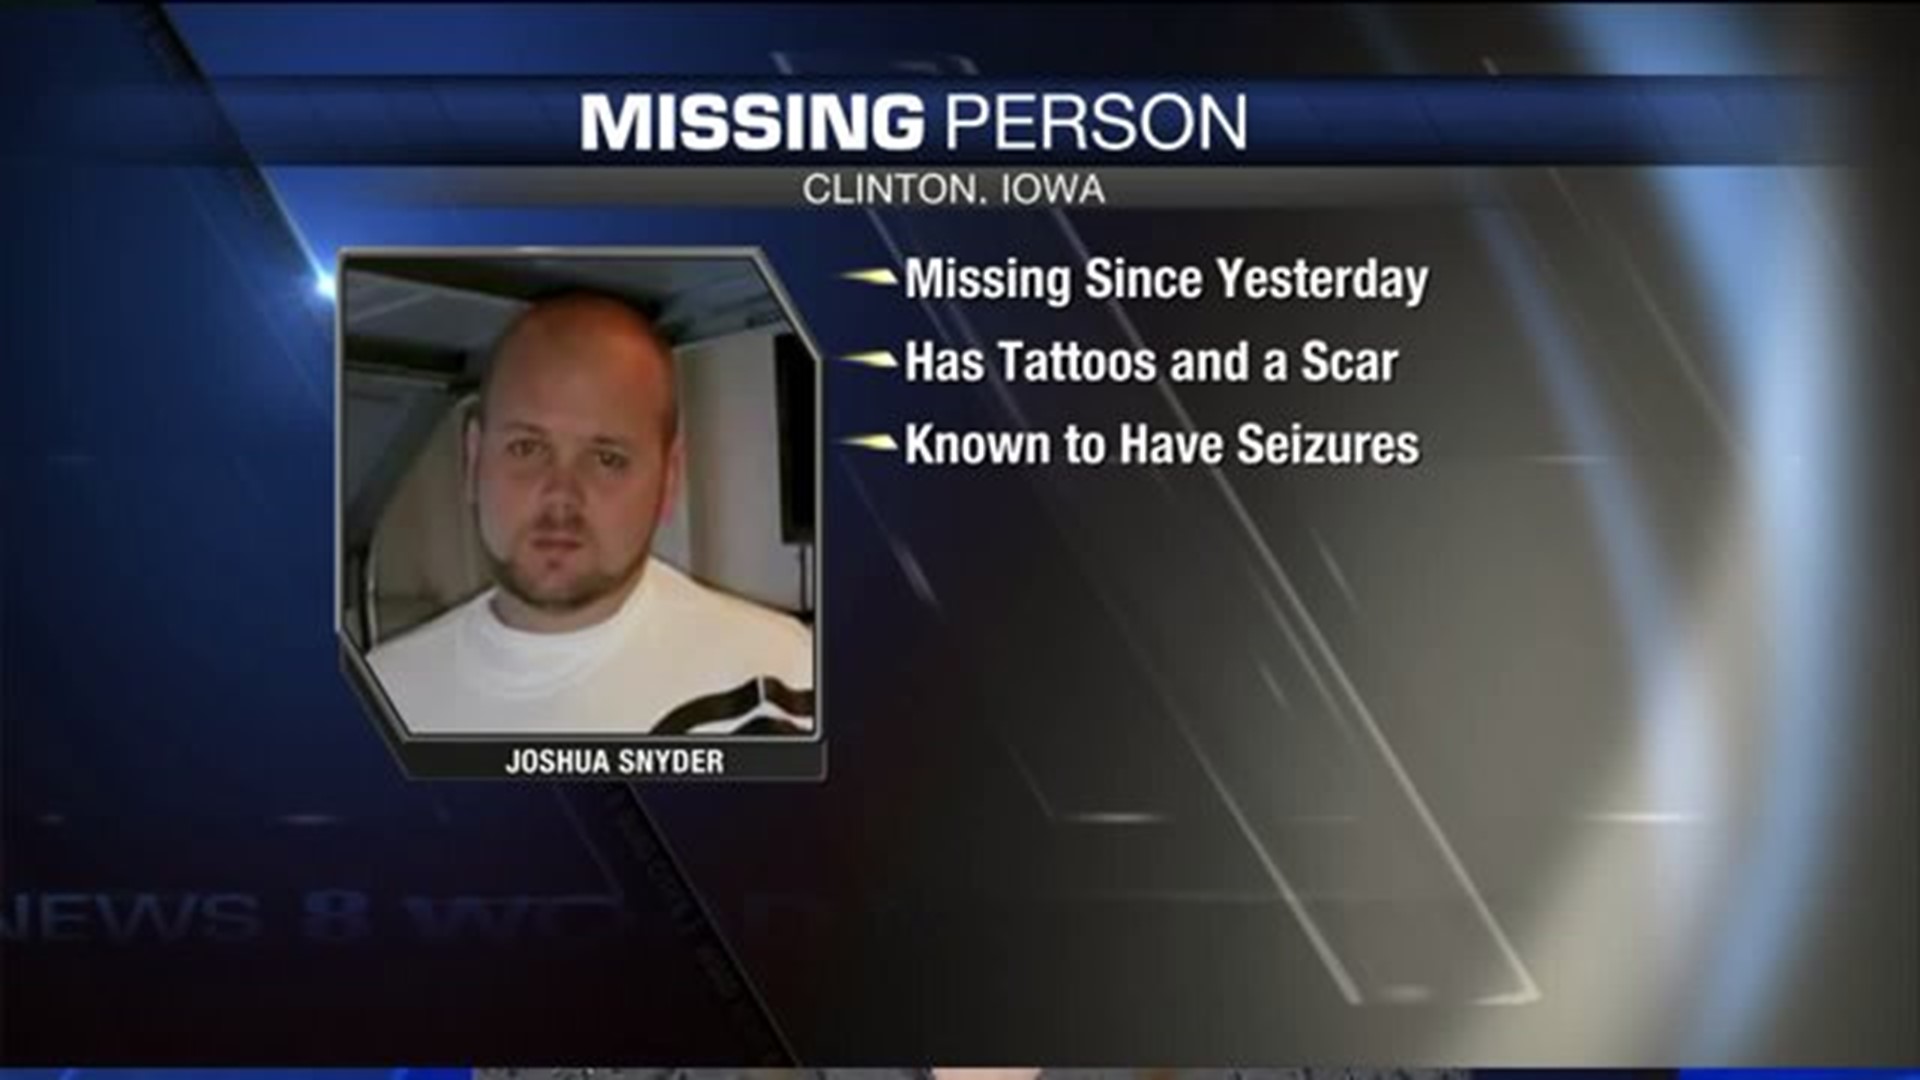 Clinton, Iowa, man with health condition reported missing | wqad.com